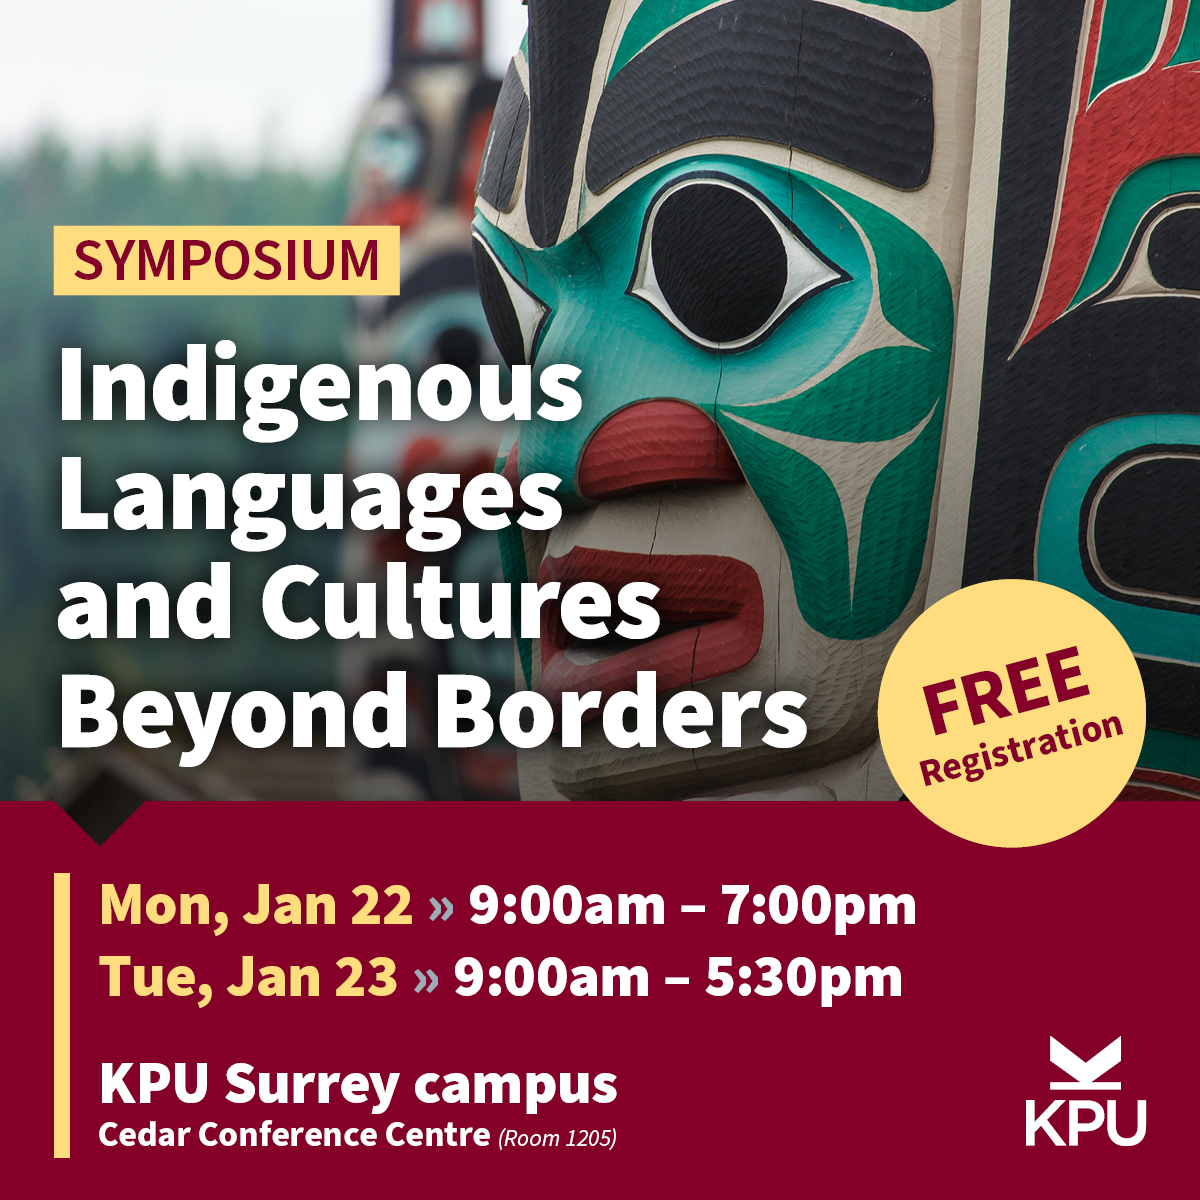 "Indigenous Languages and Cultures Beyond Borders" Symposium. Monday, Jan. 22 from 9:00am – 7:00pm and Tuesday, Jan. 23, from 9:00am – 5:30pm. KPU Surrey Campus, Cedar Conference Centre, Room 1205.